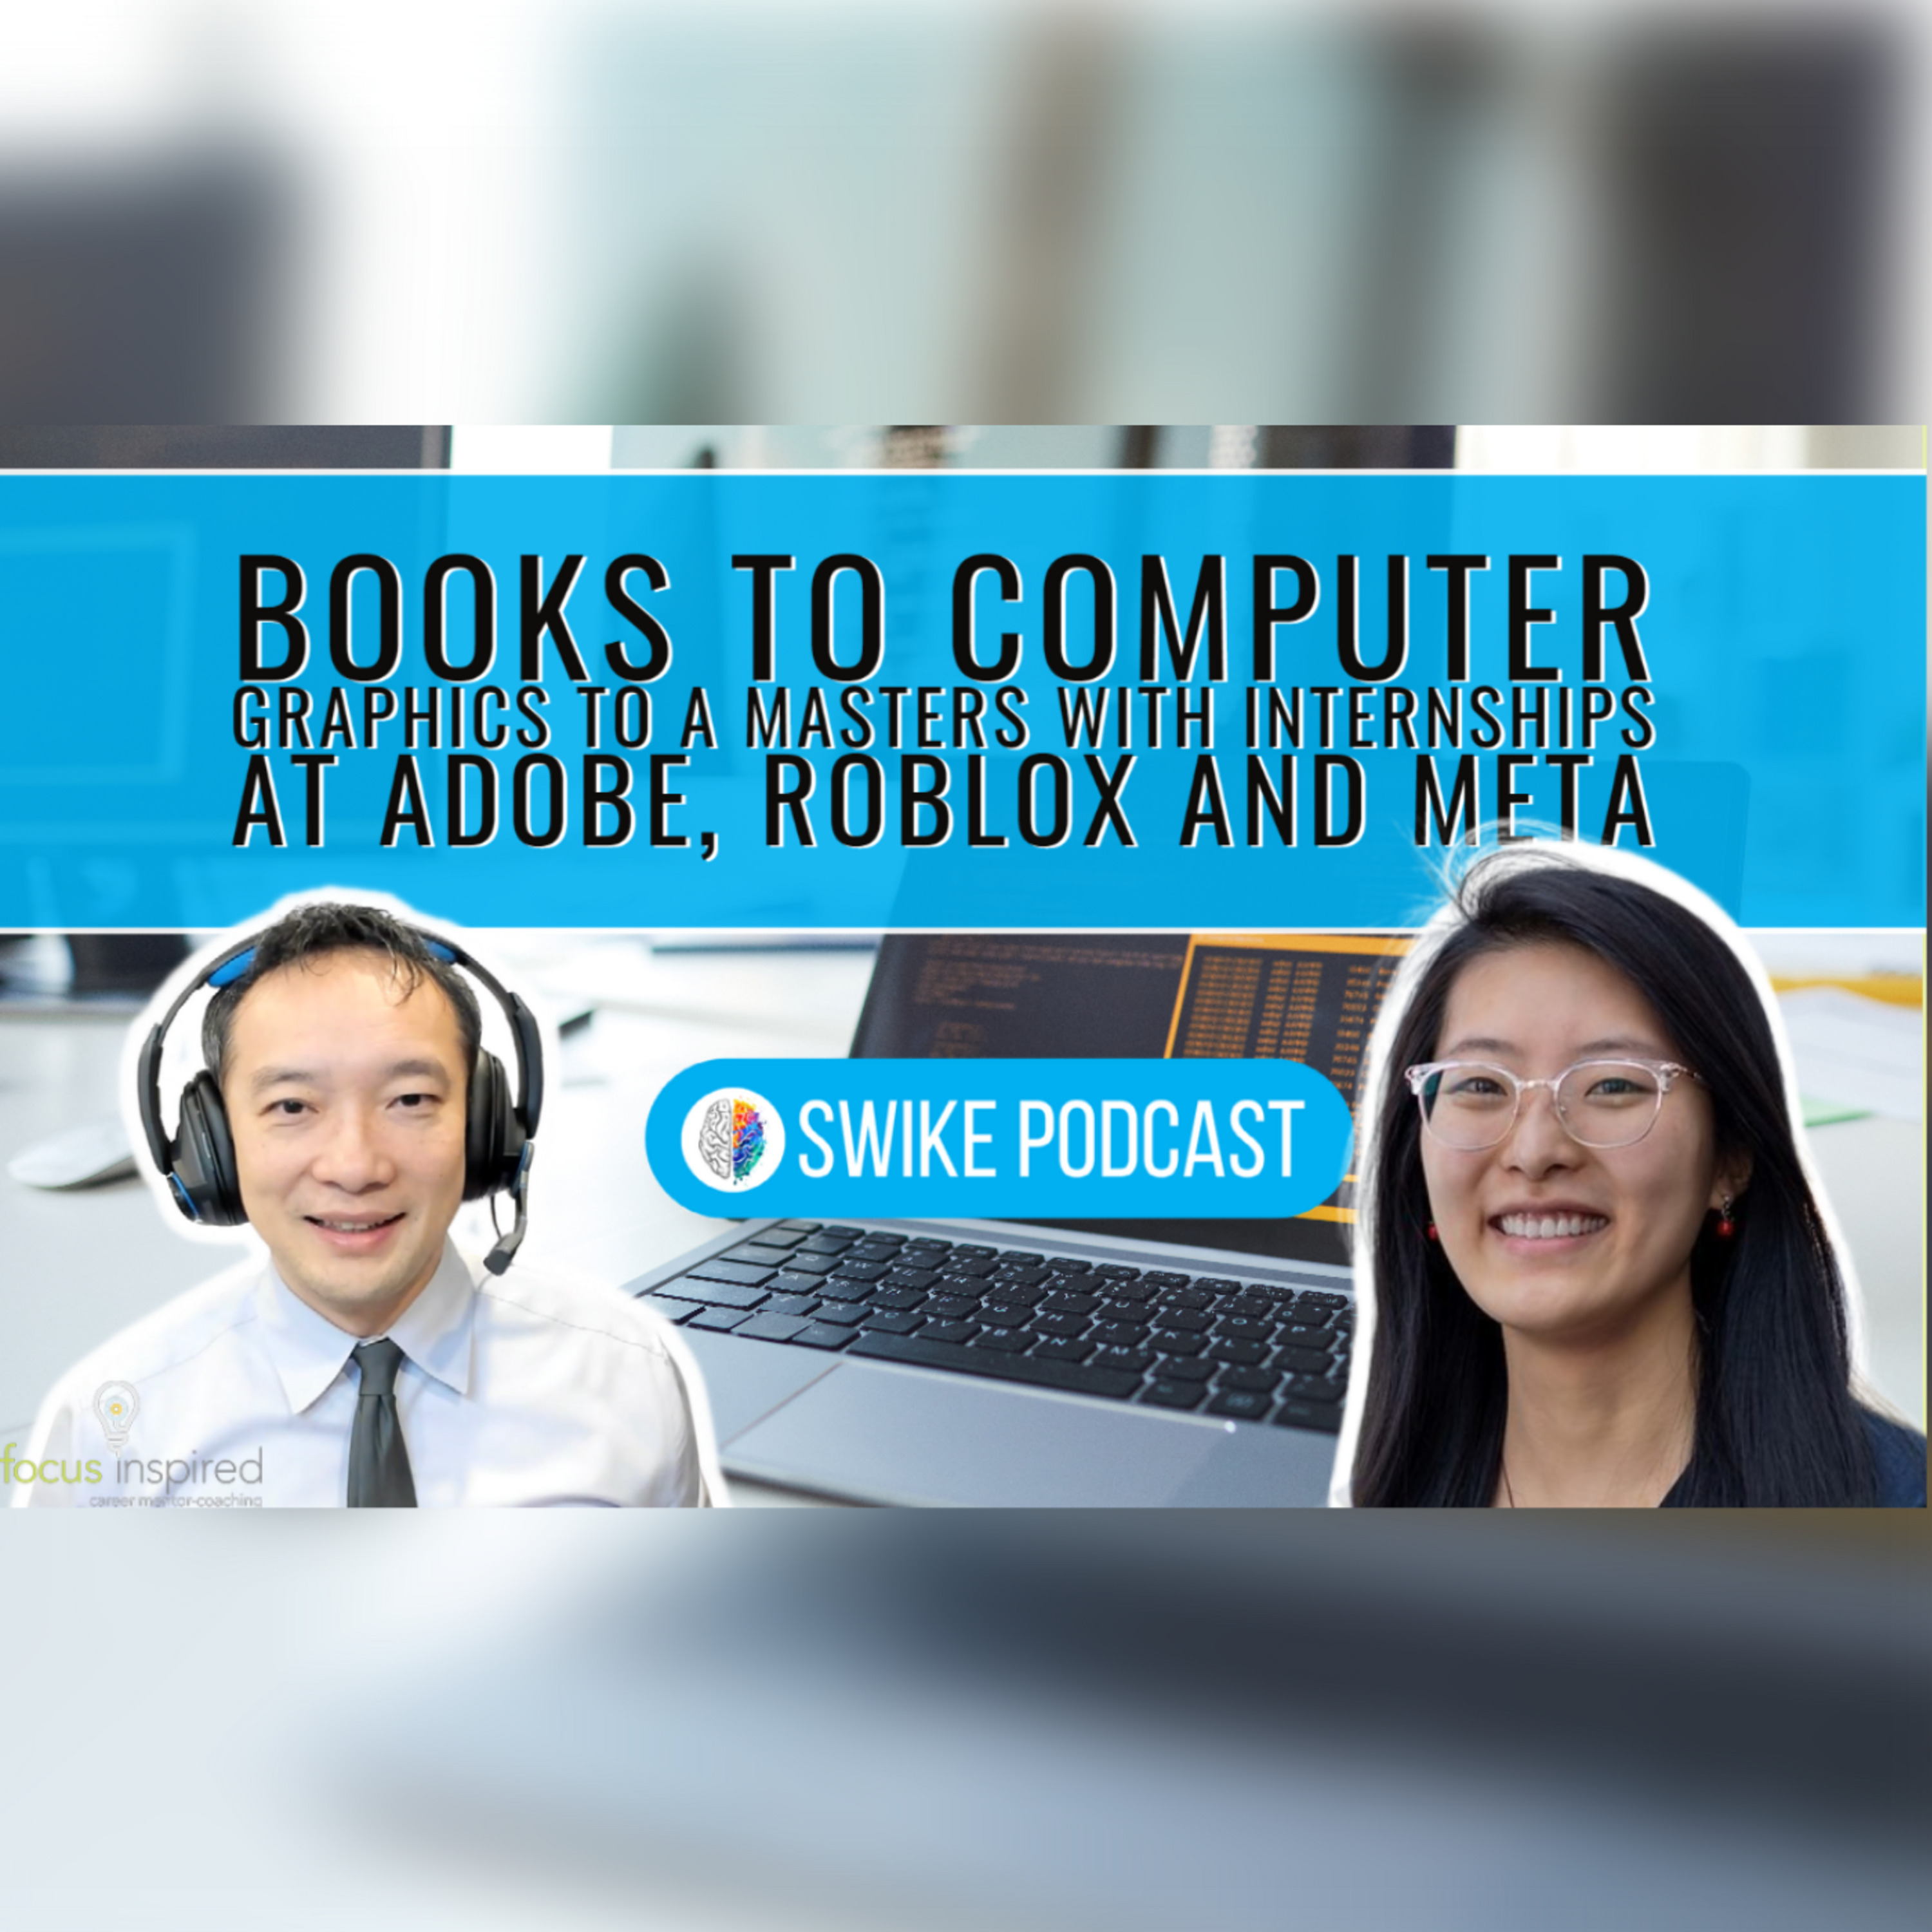 From Reading to Research: A master's with internships at Adobe, Roblox, and Meta | Cheryl Lao CL-001